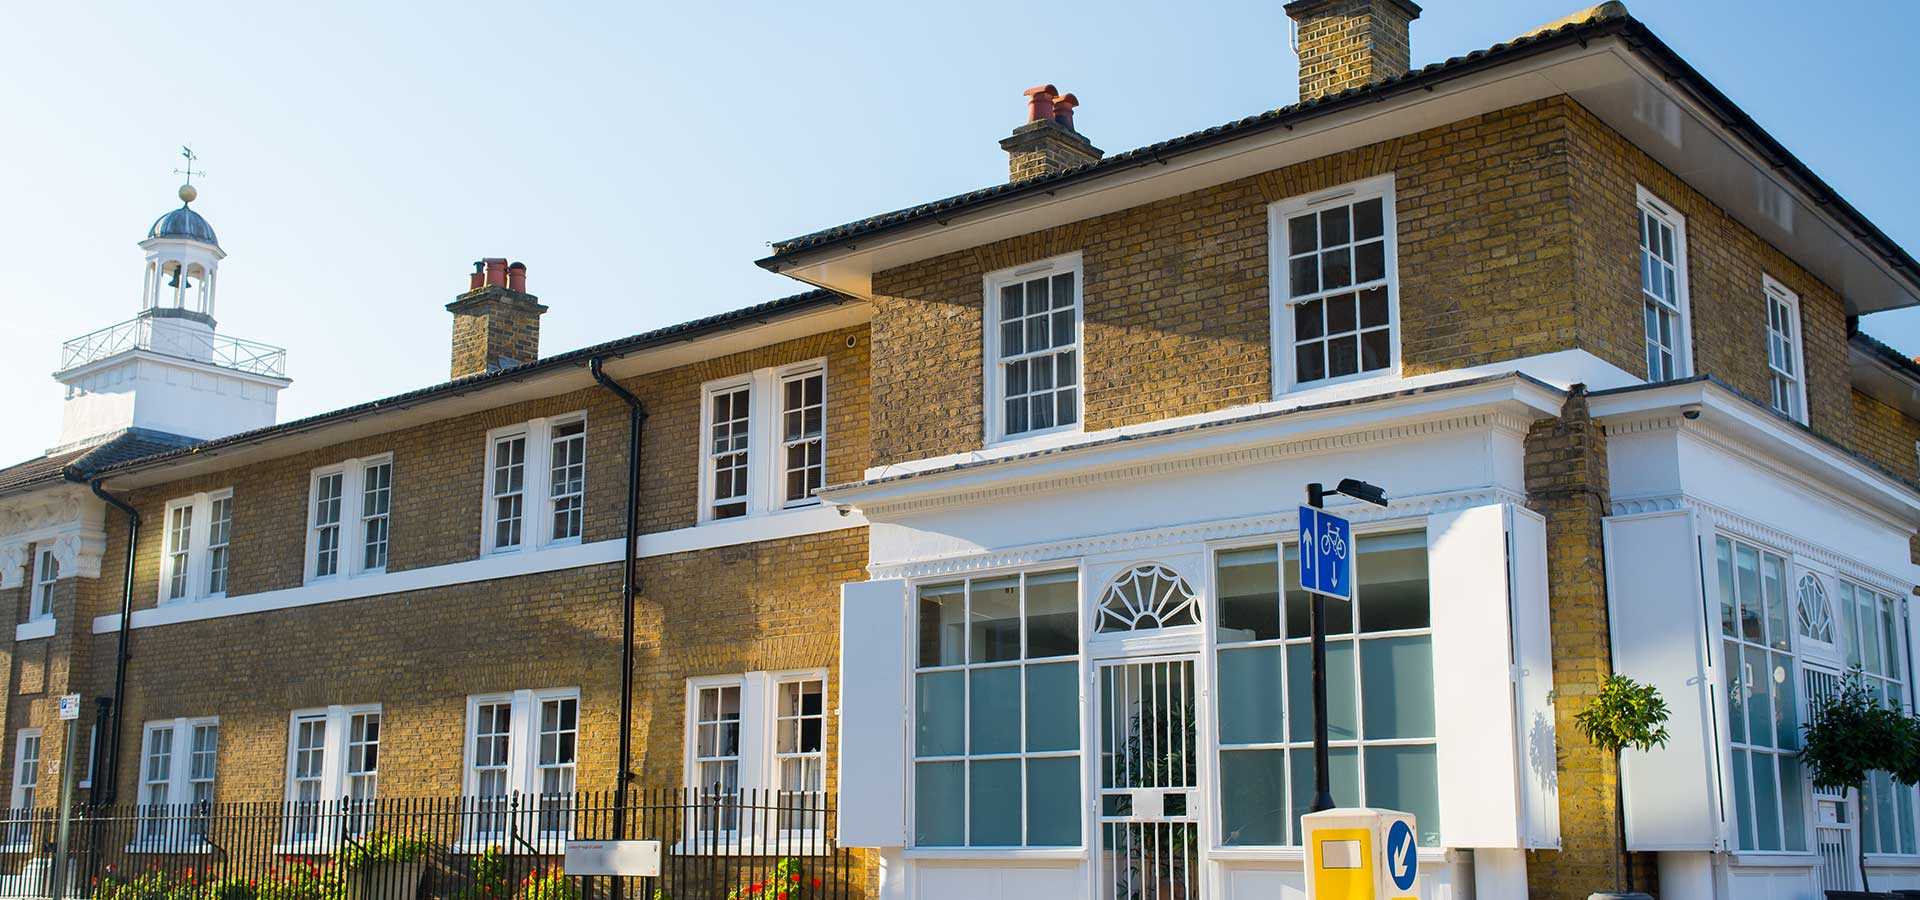 Funeral Directors Palmers Green | Fixed Price | Funeral home Fenix